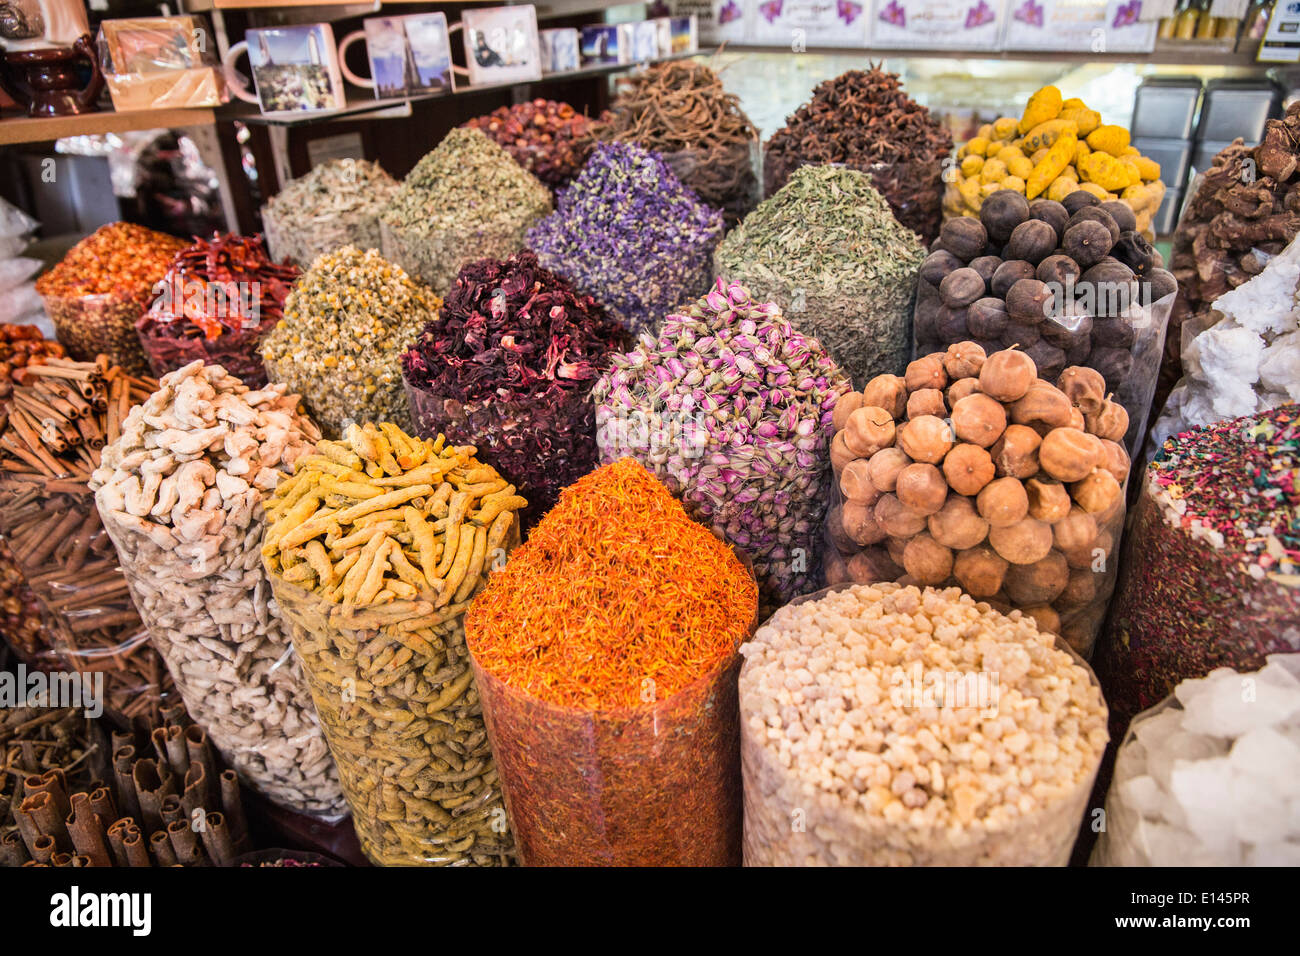 Oman, Muscat, Mutrah old city center. Display of spices Stock Photo